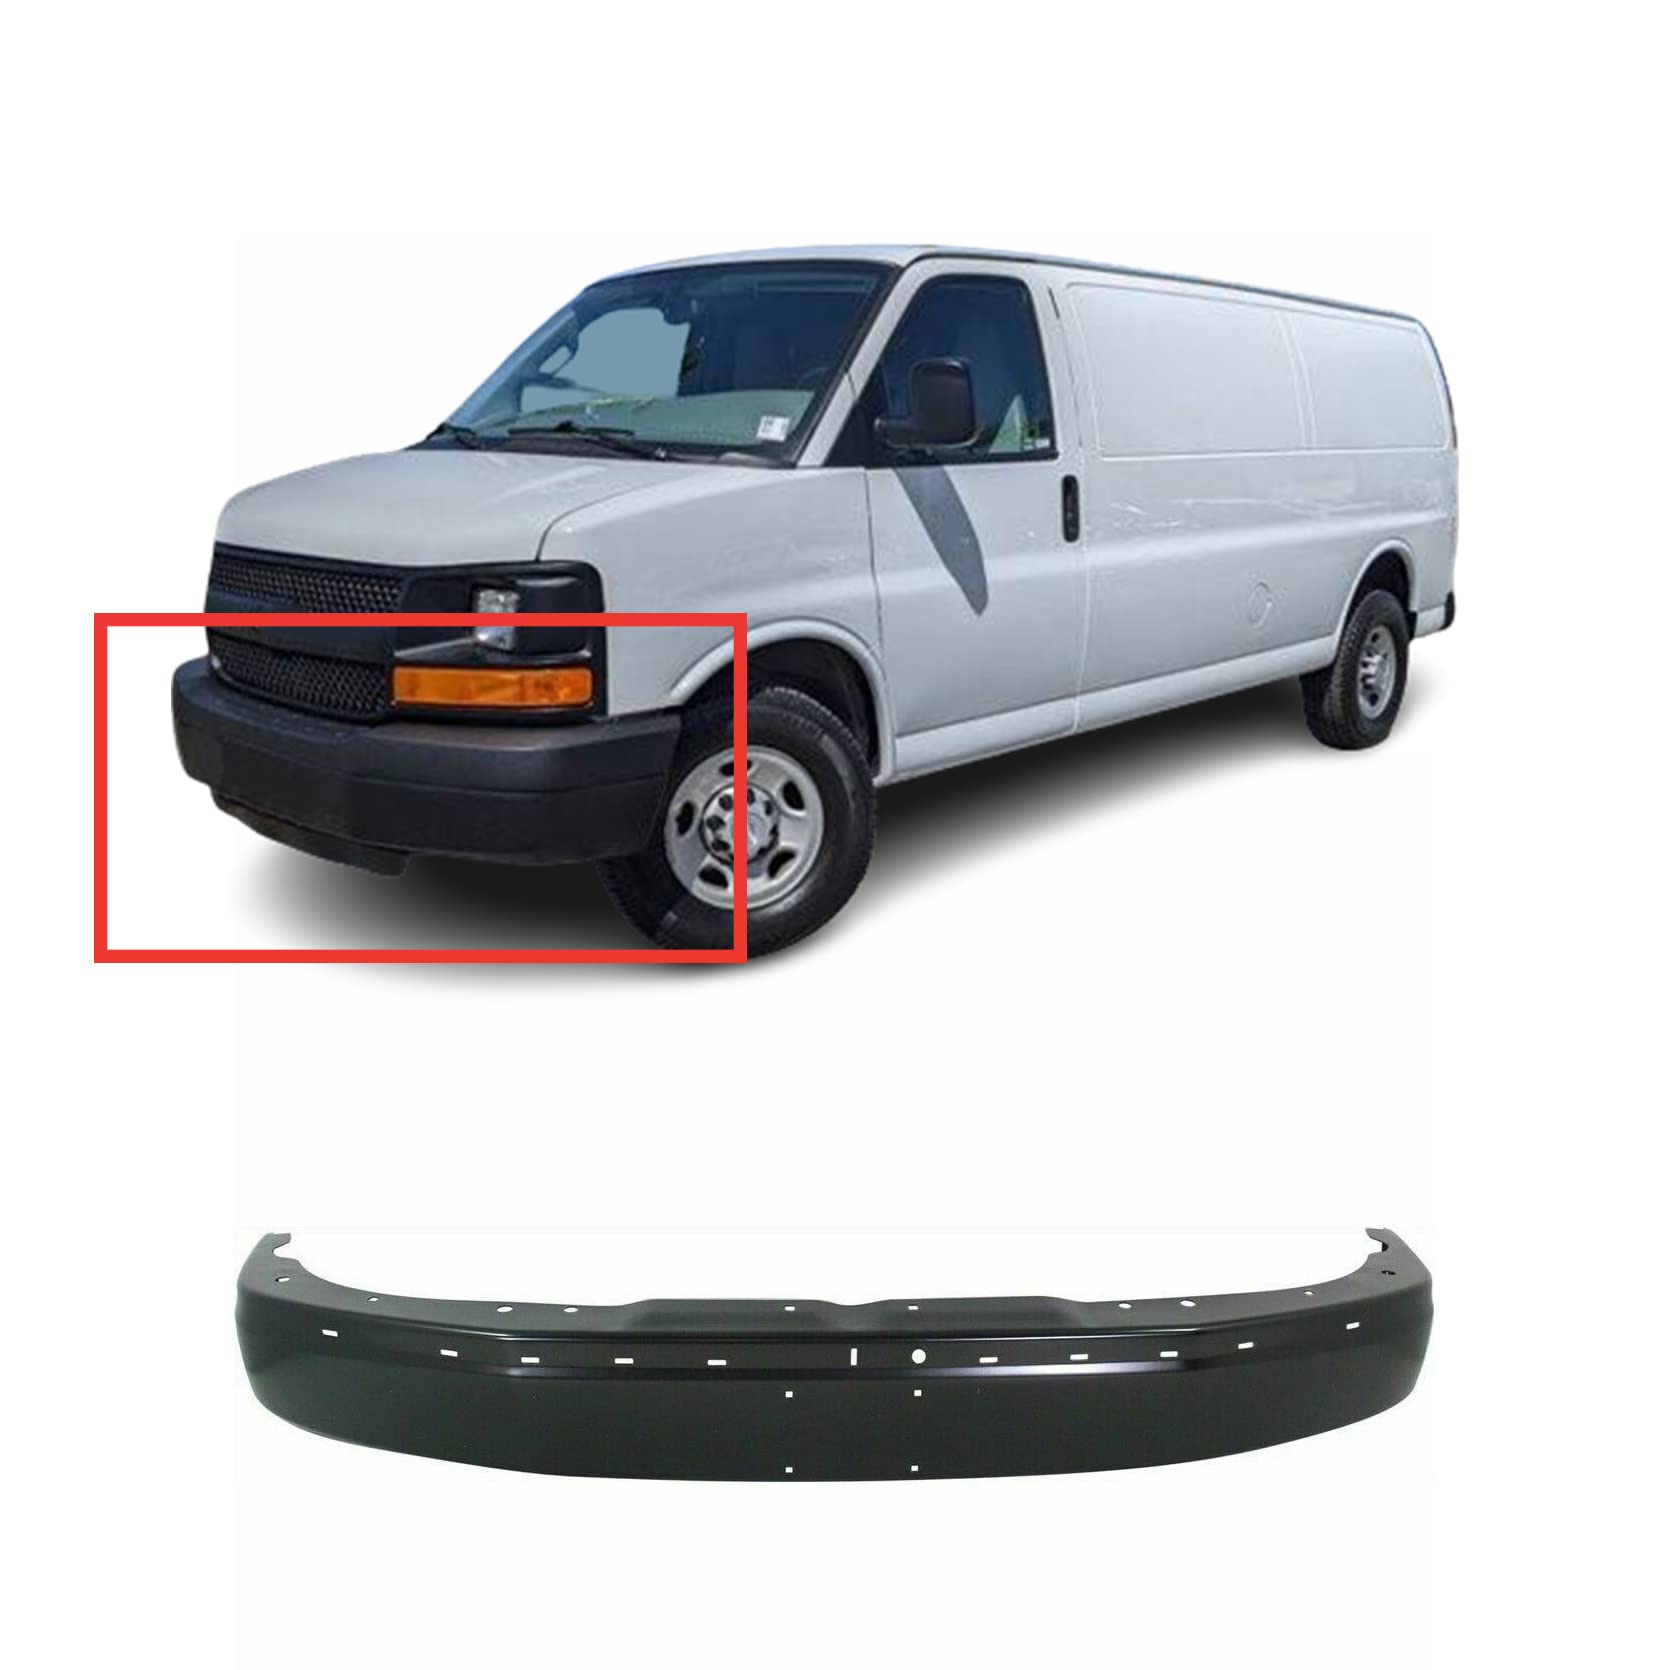 Fitparts Front Steel Bumper Cover Fascia Replacement For 2003 2005 2007  2009 2011 2013 2015 2017 2020 Chevy Chevrolet Express GMC Savana 03 05 07  09 11 13 15 17 20. New. W/License Plate Holes 22872781